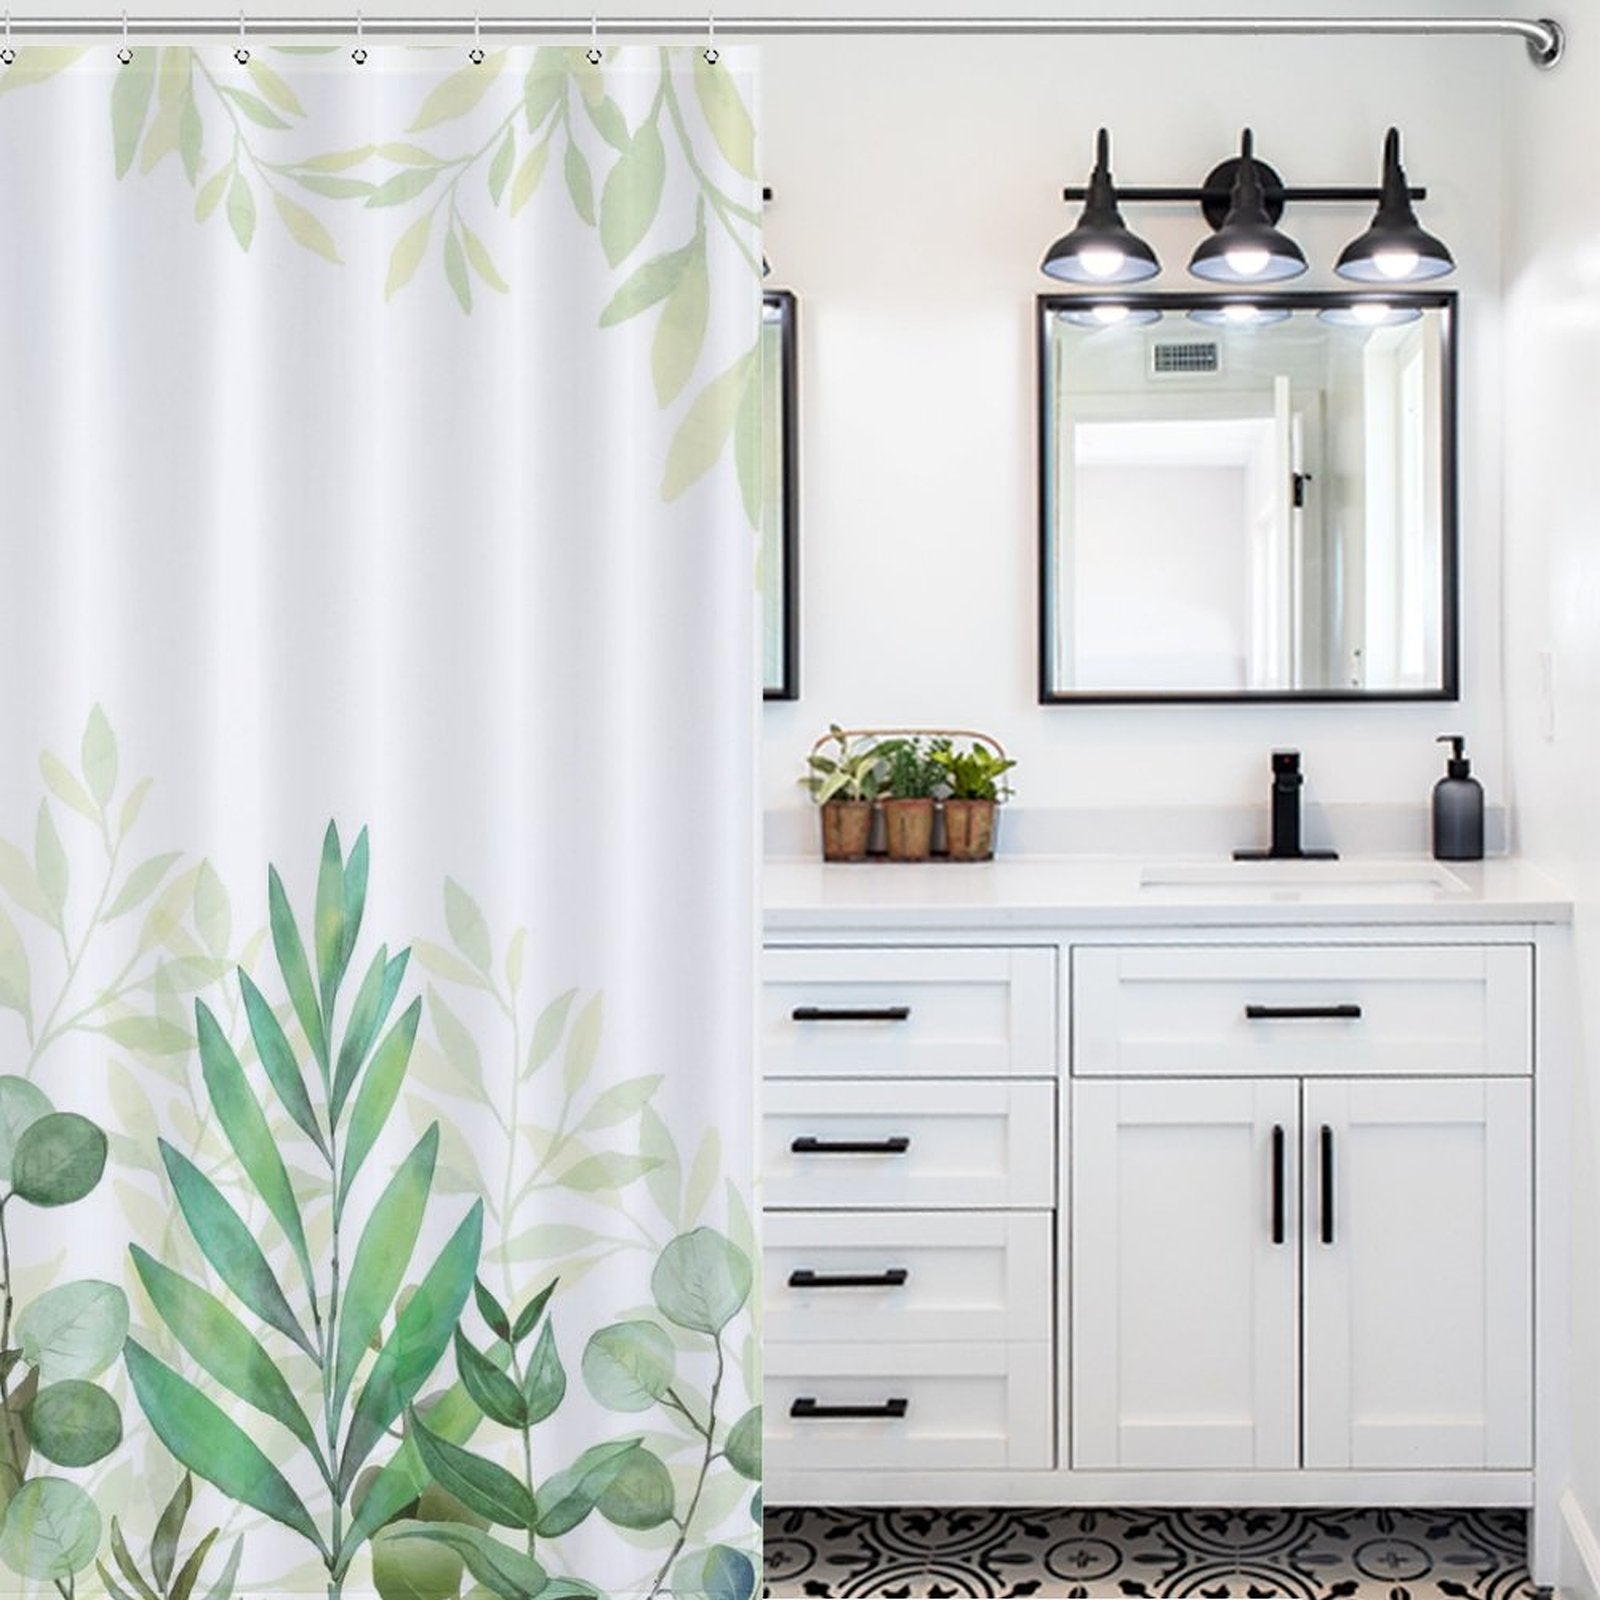 Modern bathroom with a Cotton Cat Natural Modern Ombre Sage Green White Leaf Shower Curtain-Cottoncat, black and white cabinets with black handles, a mirror above the sink, and light fixtures with three bulbs on the wall. Natural tones are emphasized by a plant on the counter.